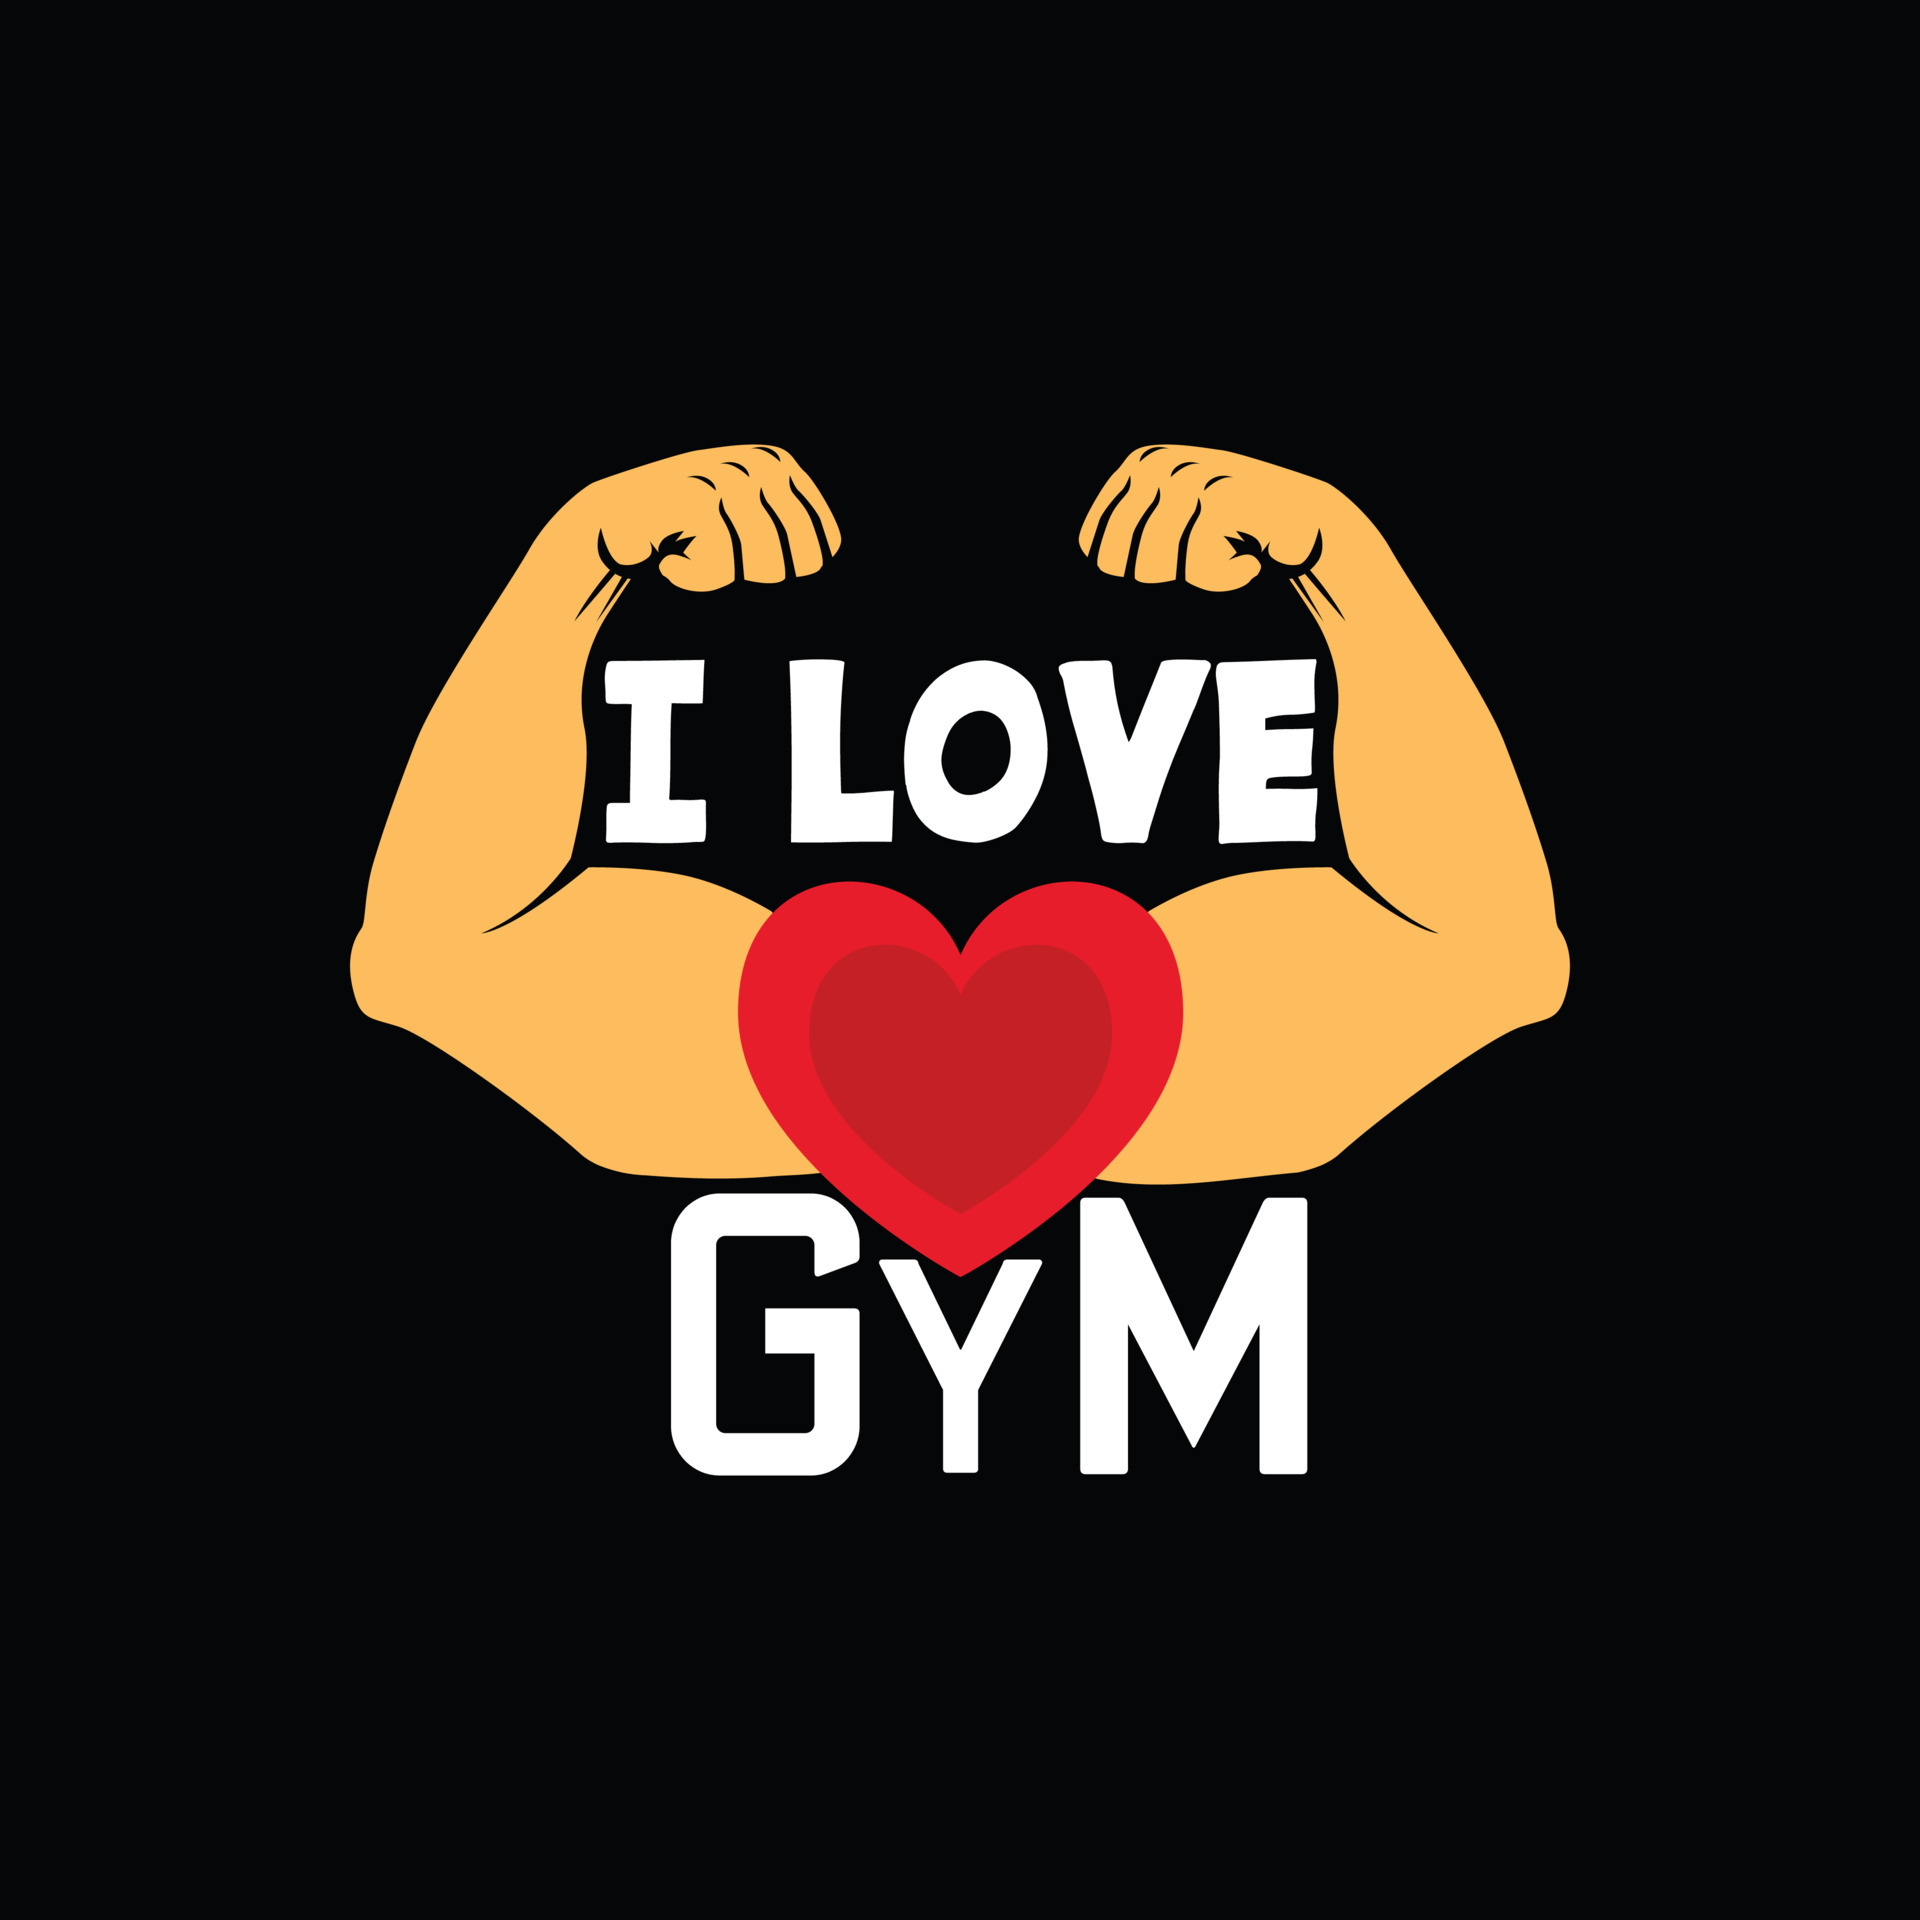 I love gym vector t-shirt design. Gym t-shirt design. Can be used